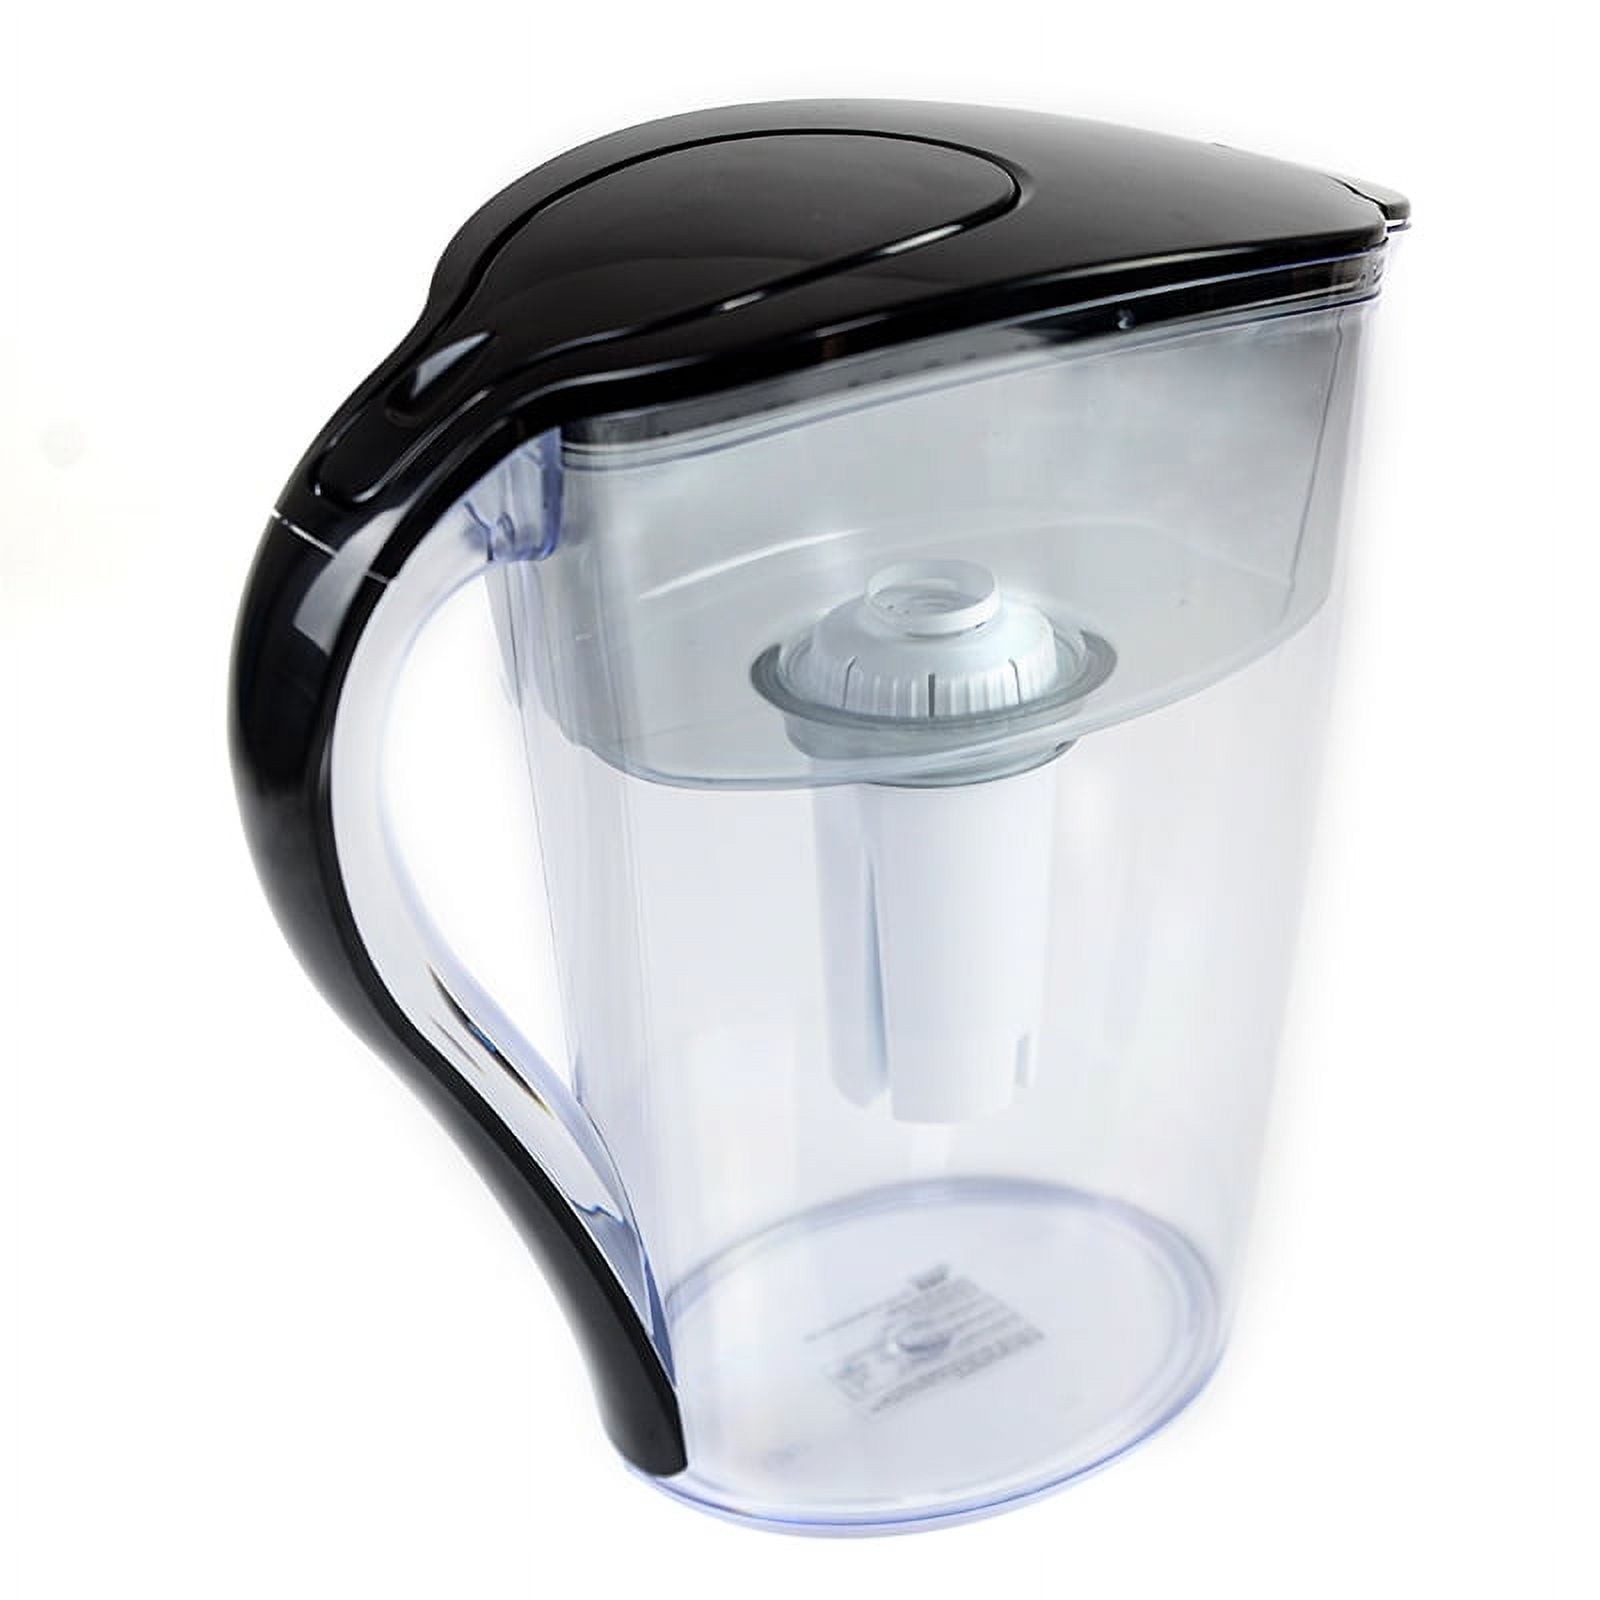 Great Value Water Filter Pitcher 10 Cup Series, Blue Color, BPA-Free Plastic Water Pitcher, Brita Filter Compatible